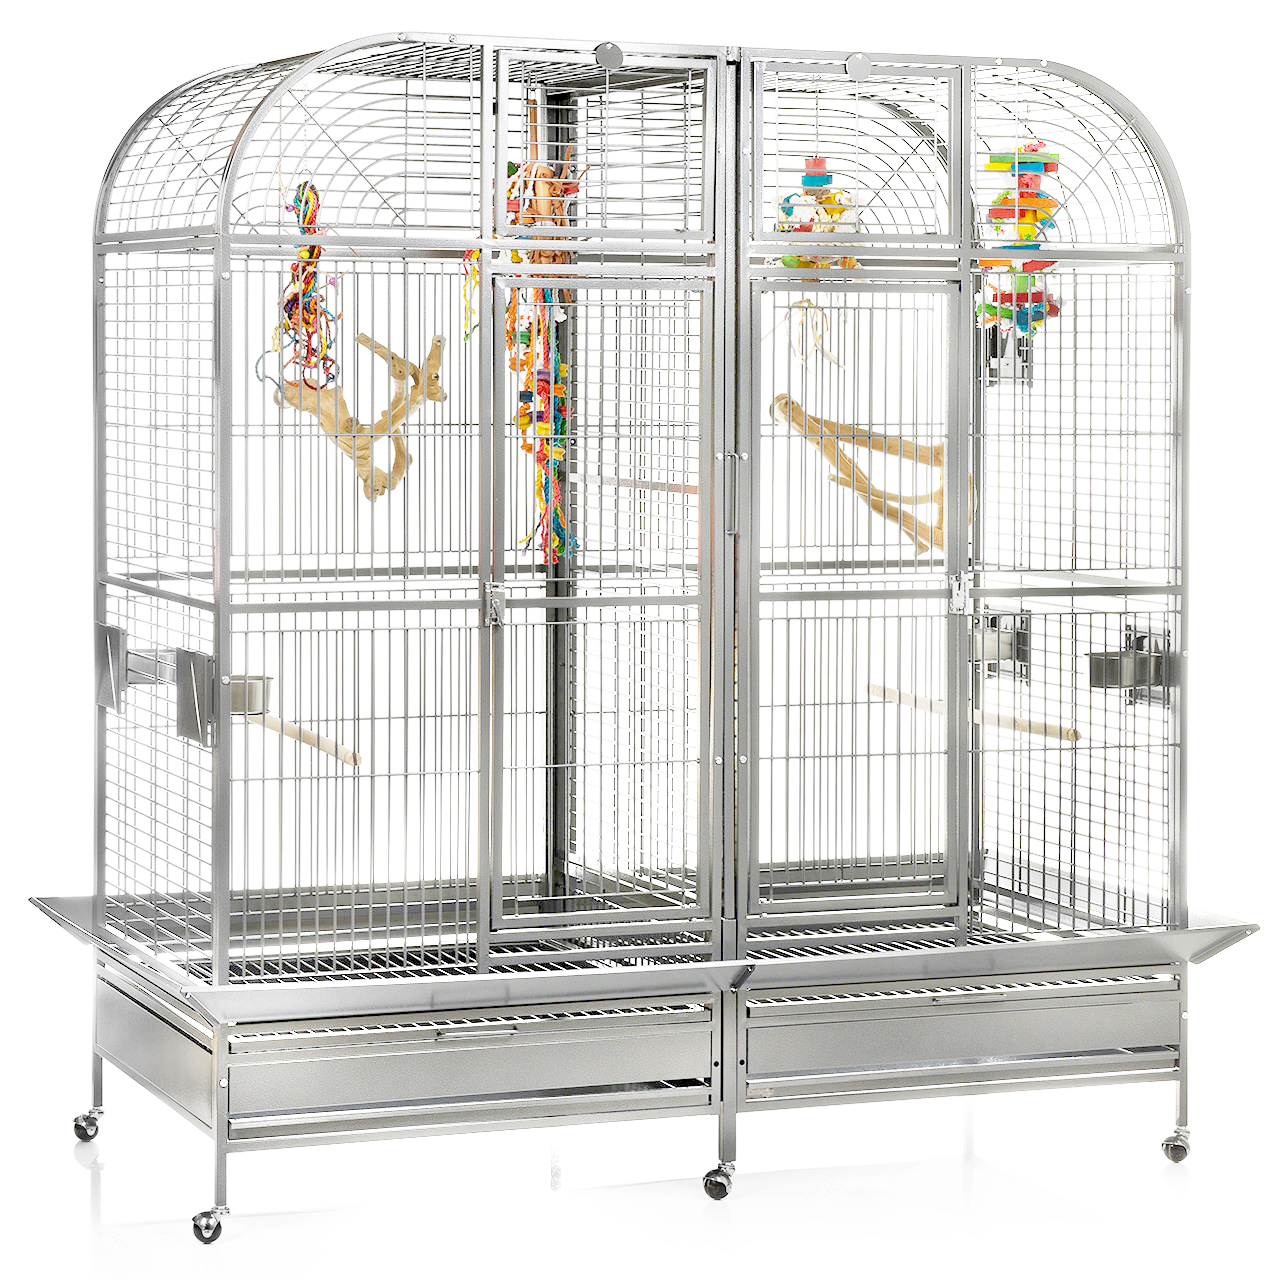 Macaw Bird Cages, Bird Cages for Macaws, Large Macaw Cages, Large Bird Cages